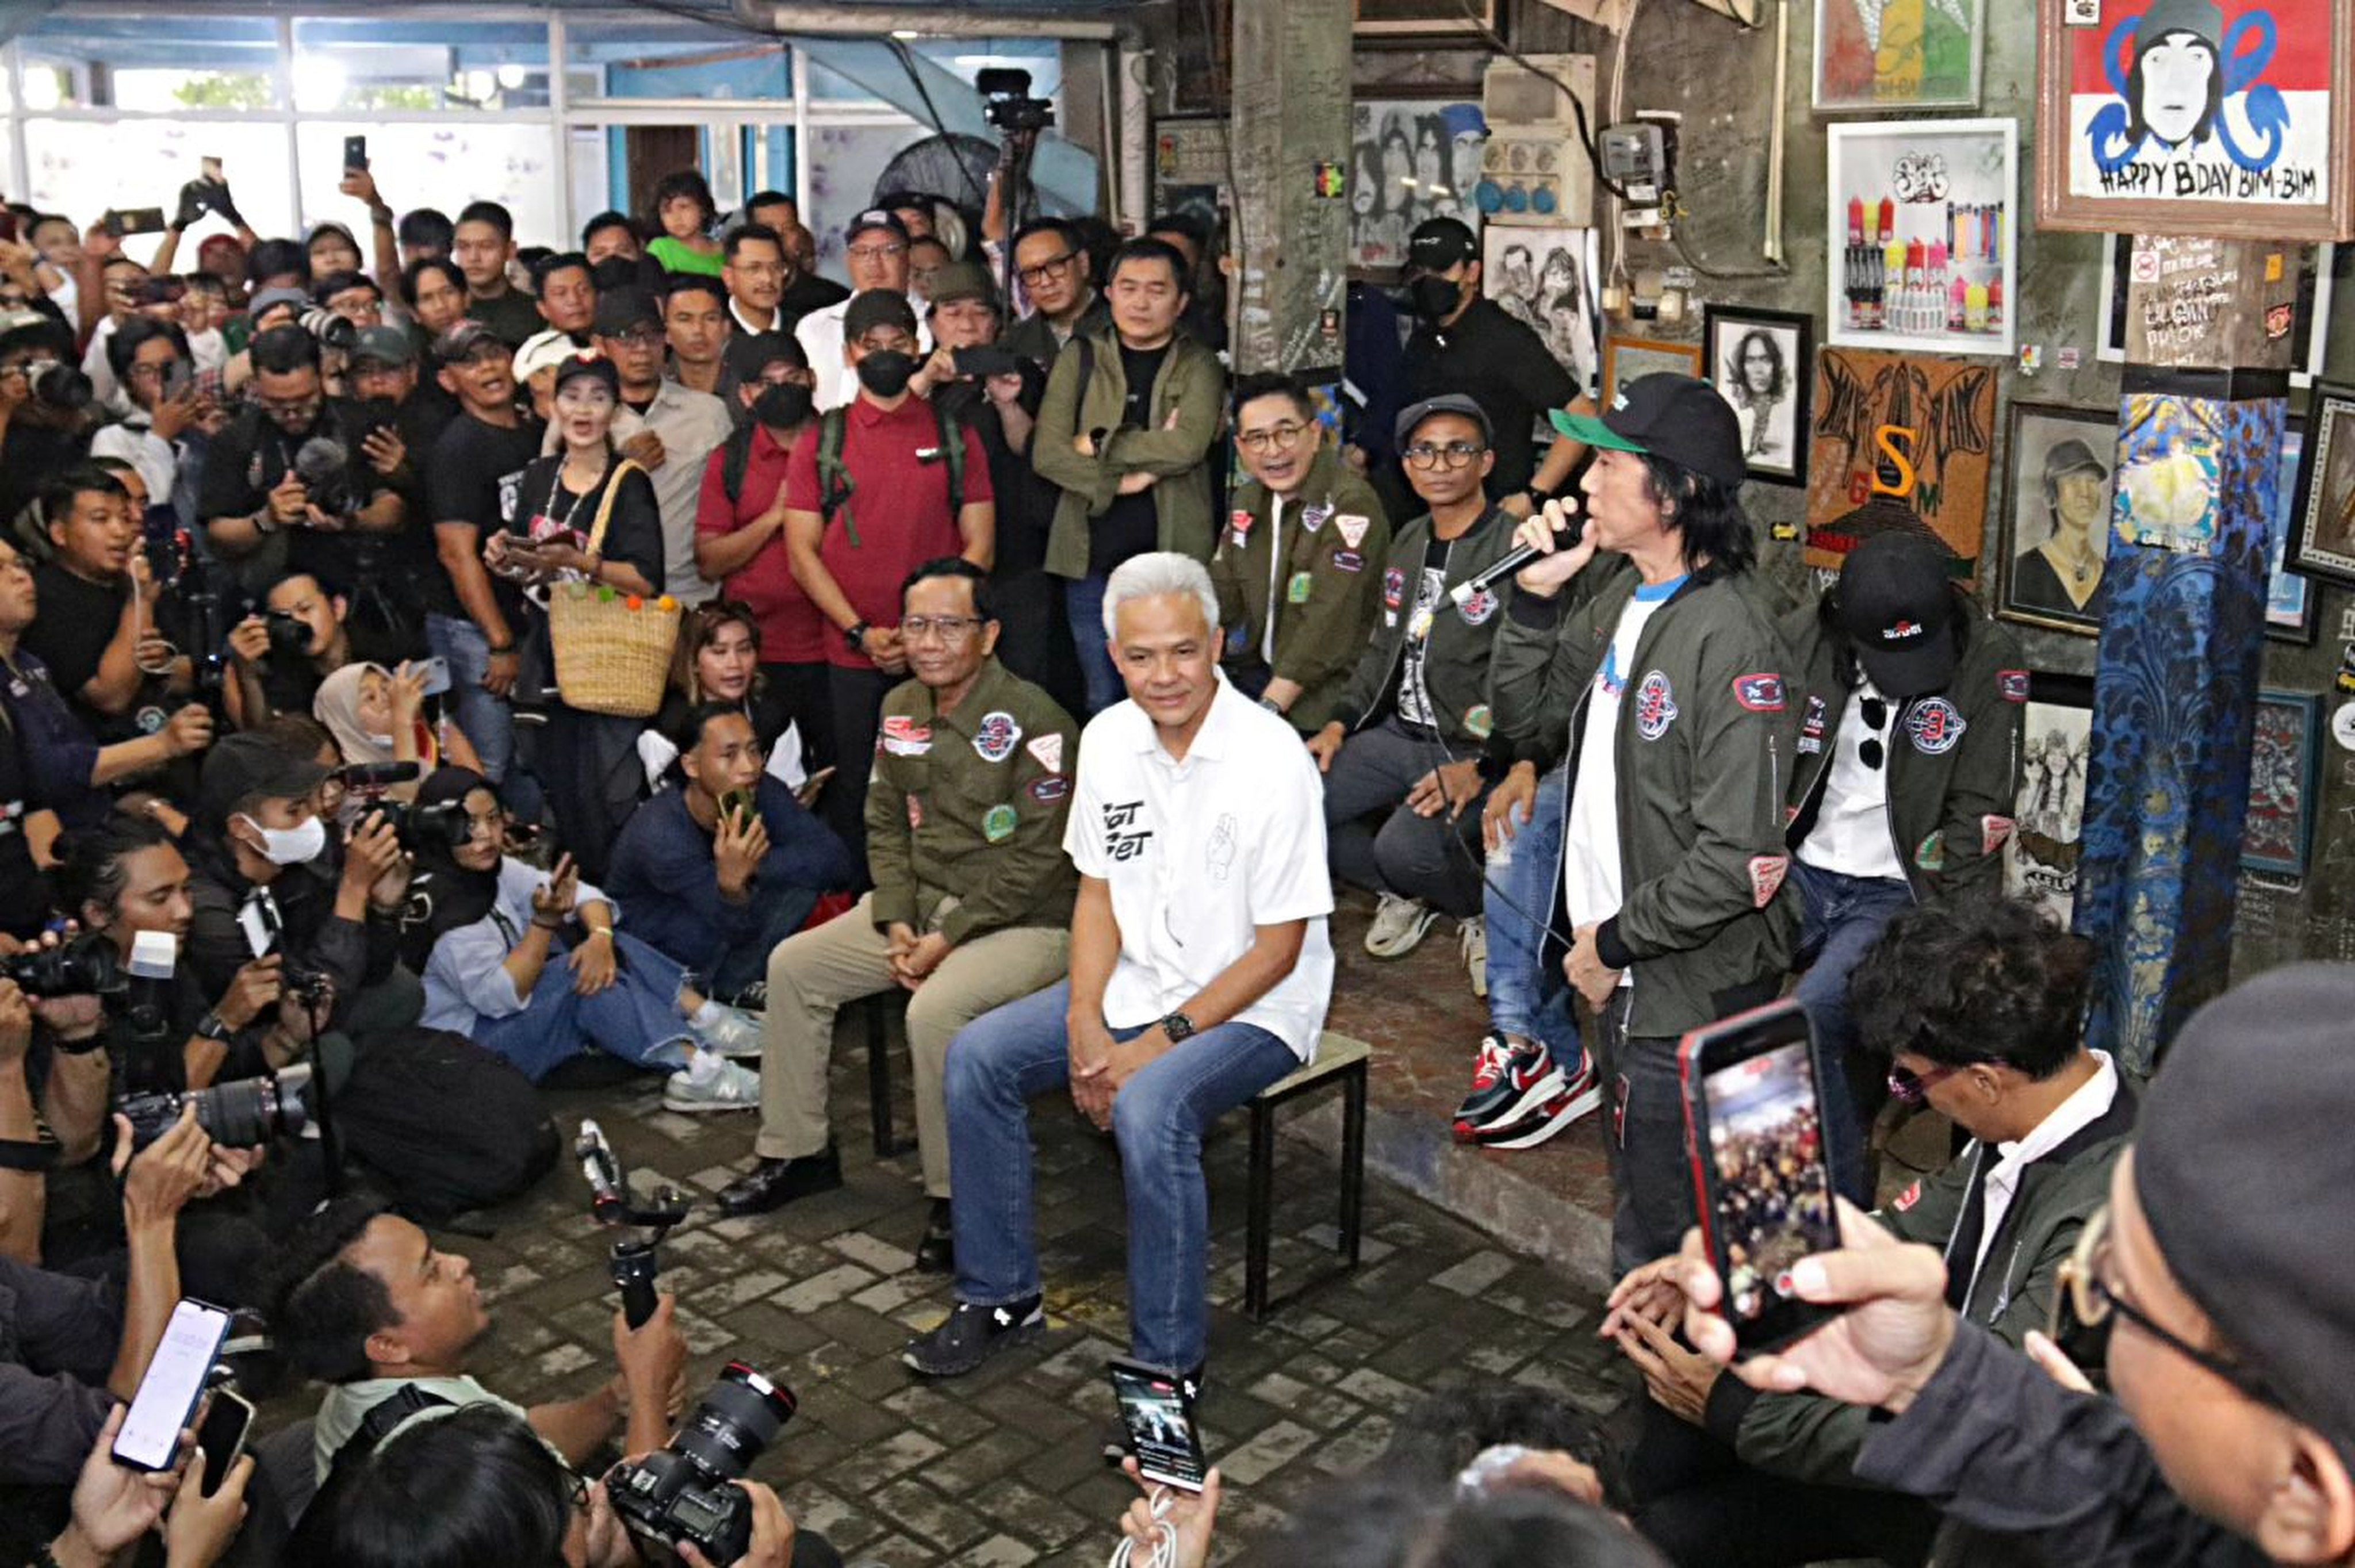 Indonesian rock band Slank with presidential candidate Ganjar Pranowo (in white shirt) and running mate Mohammad Mahfud during its press conference in Jakarta on Saturday. Photo: Instagram